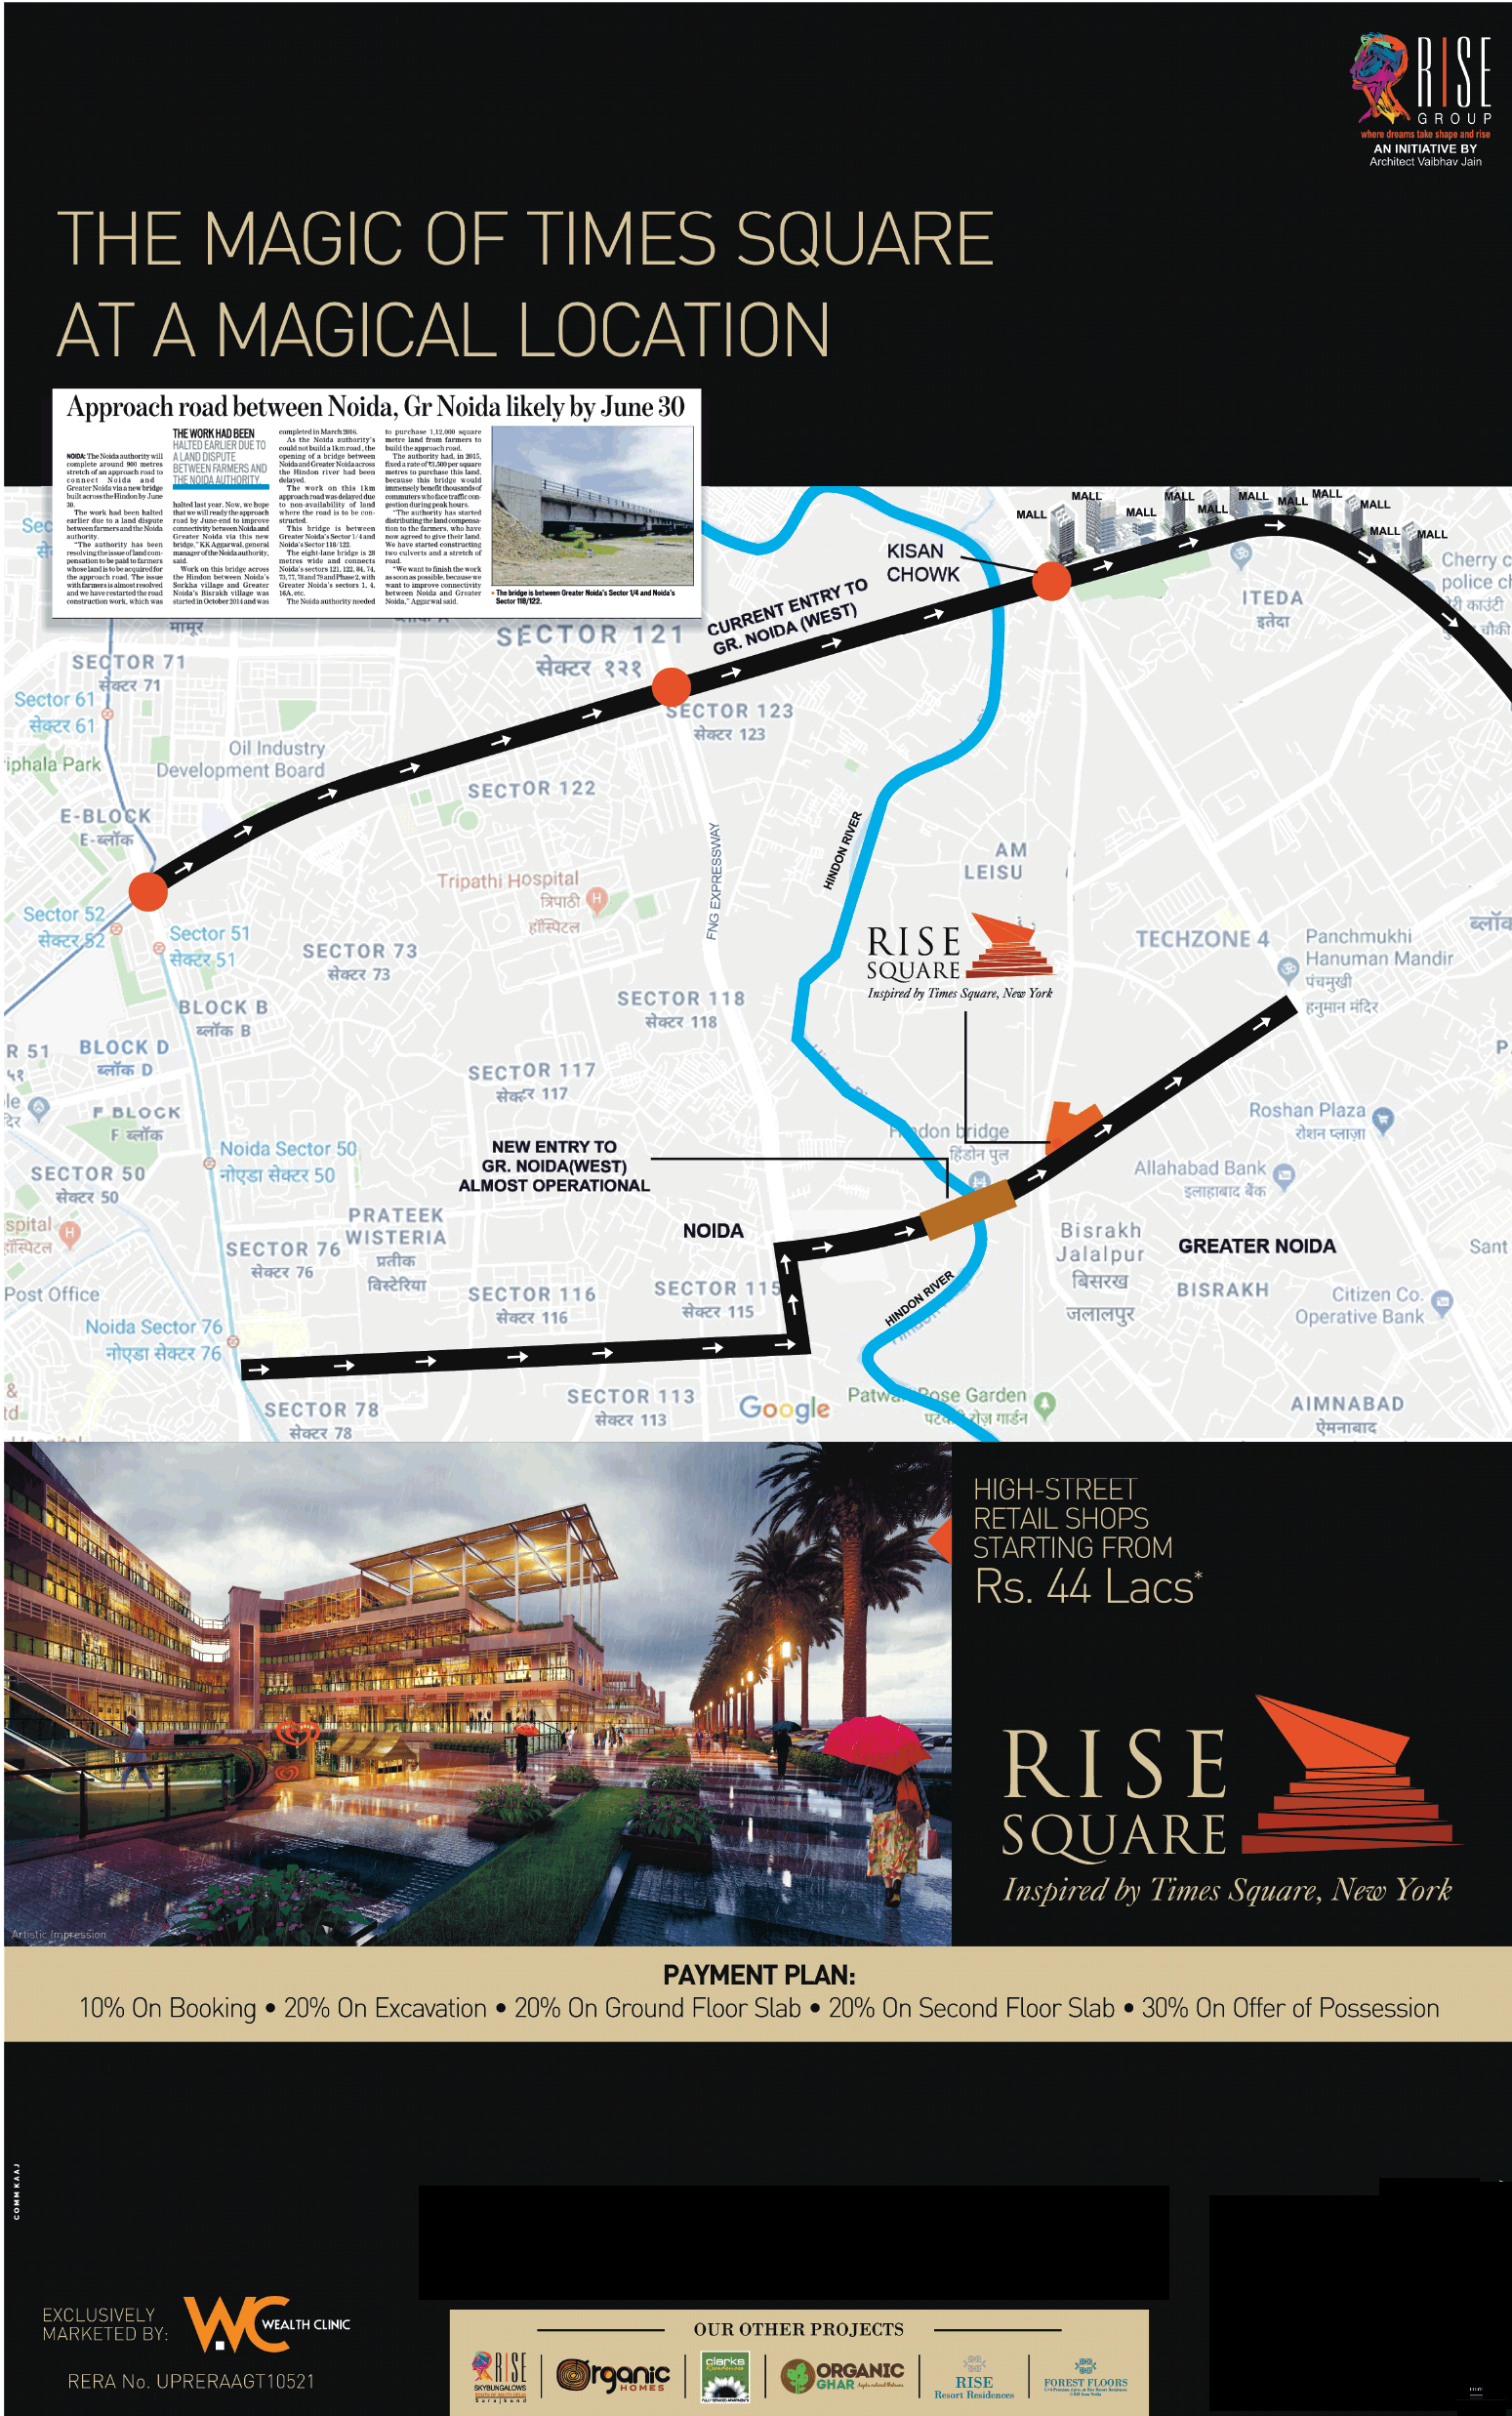 High street  retail shops starting from Rs. 40 lacs at Rise Square, Greater Noida Update